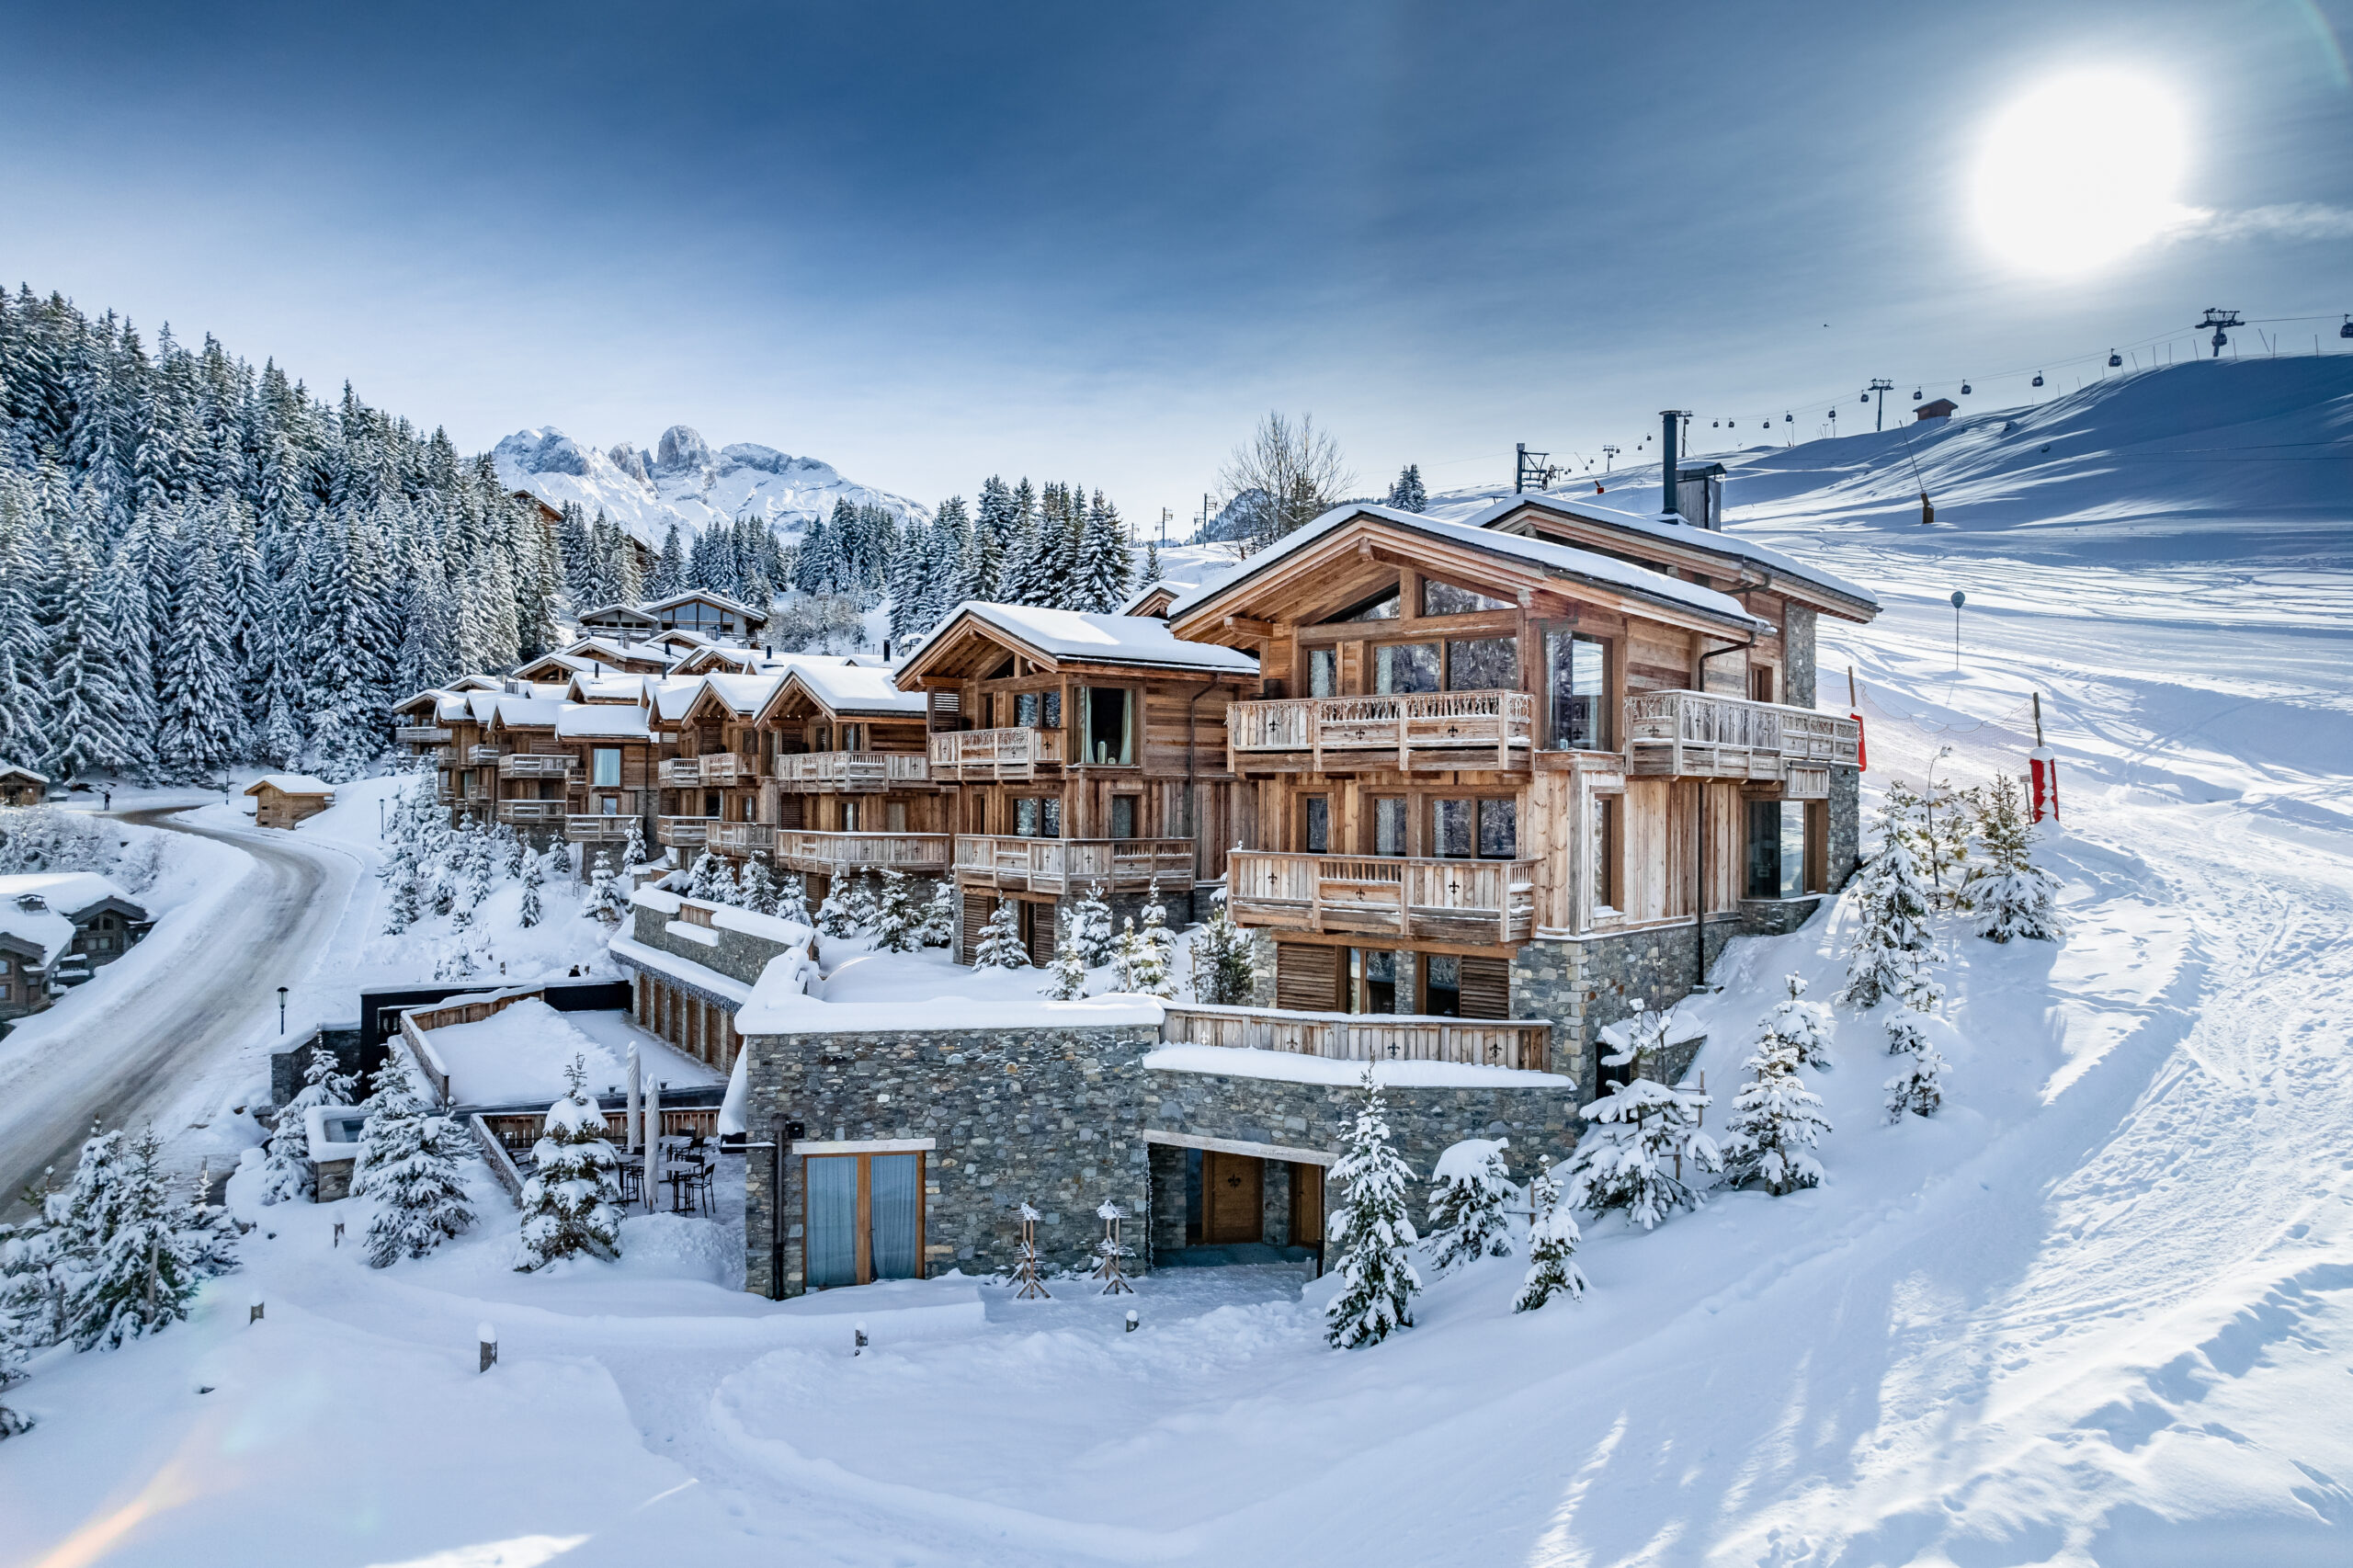 Prada Opens a New Store in Courchevel, France